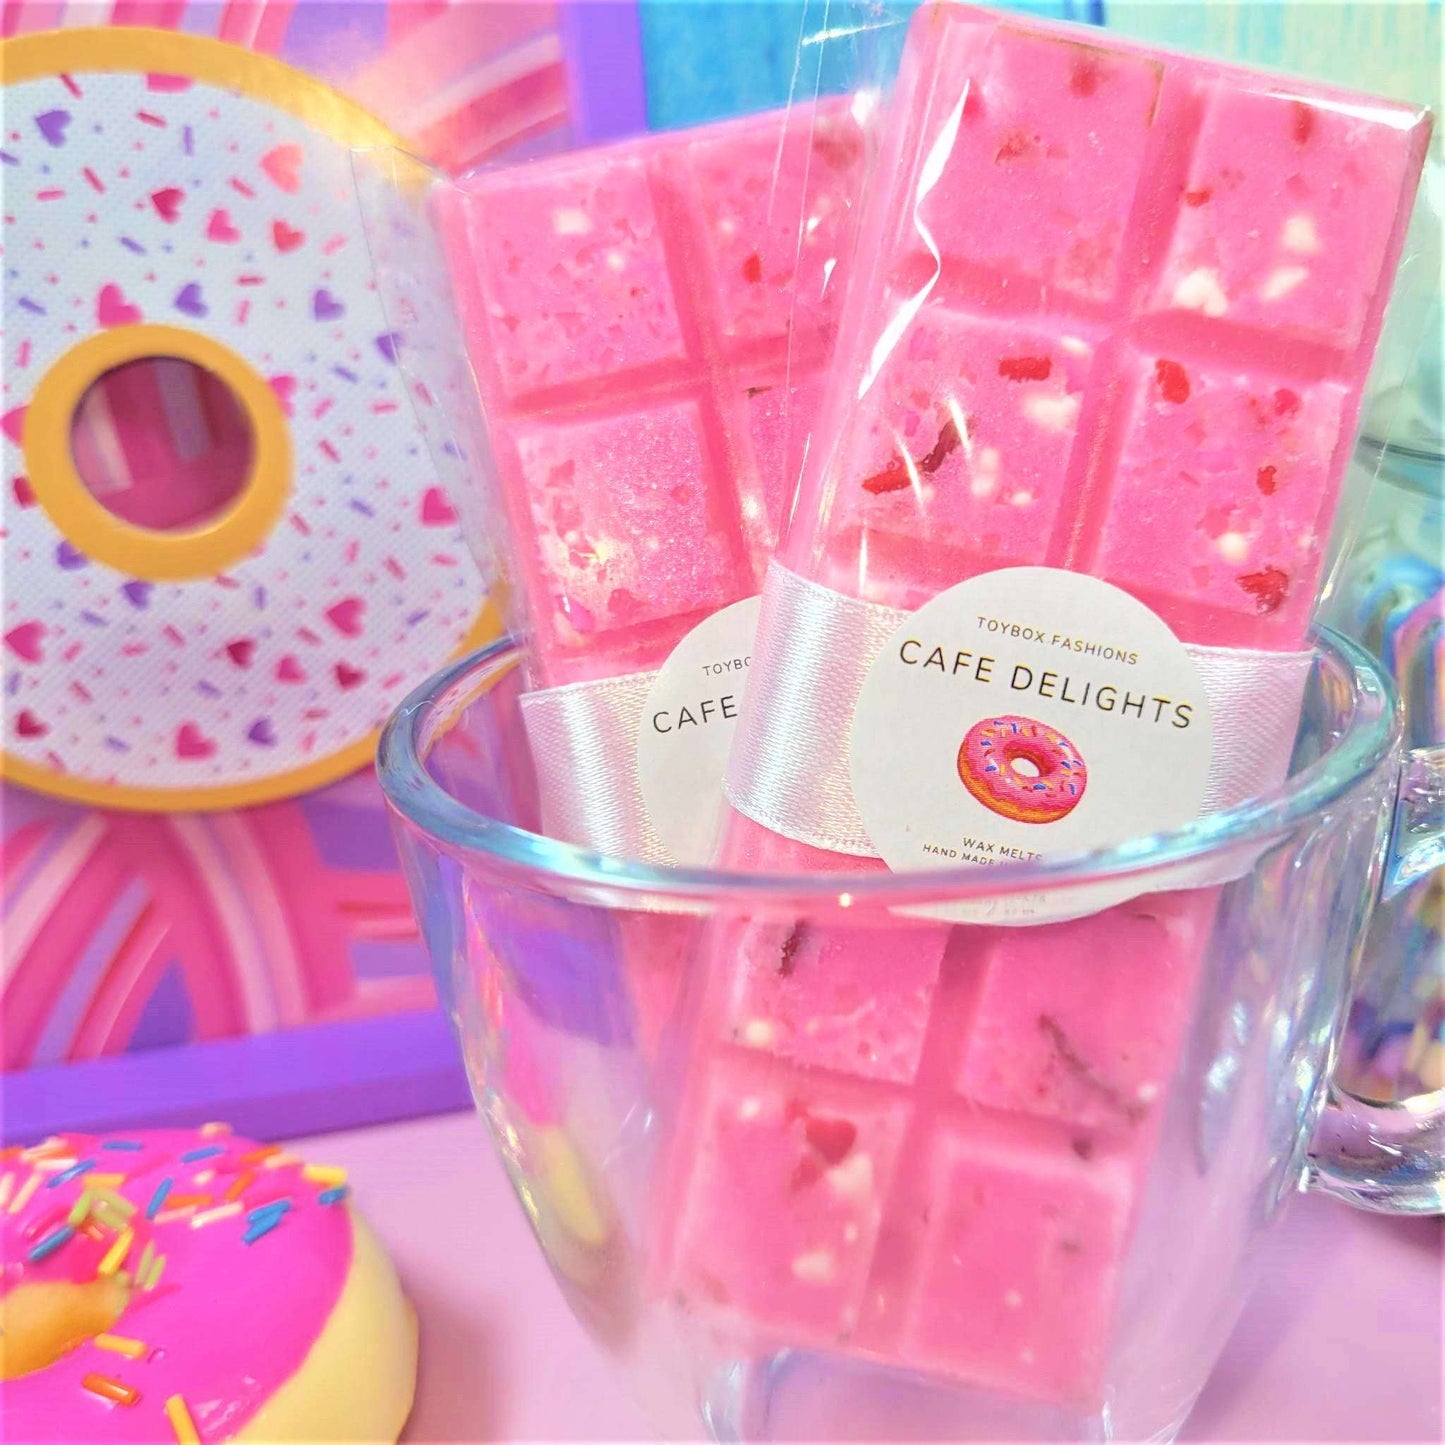 Cafe Delights Strawberry Jelly Scented Soy Wax Melt Bar 1.7 oz/ 50 ml